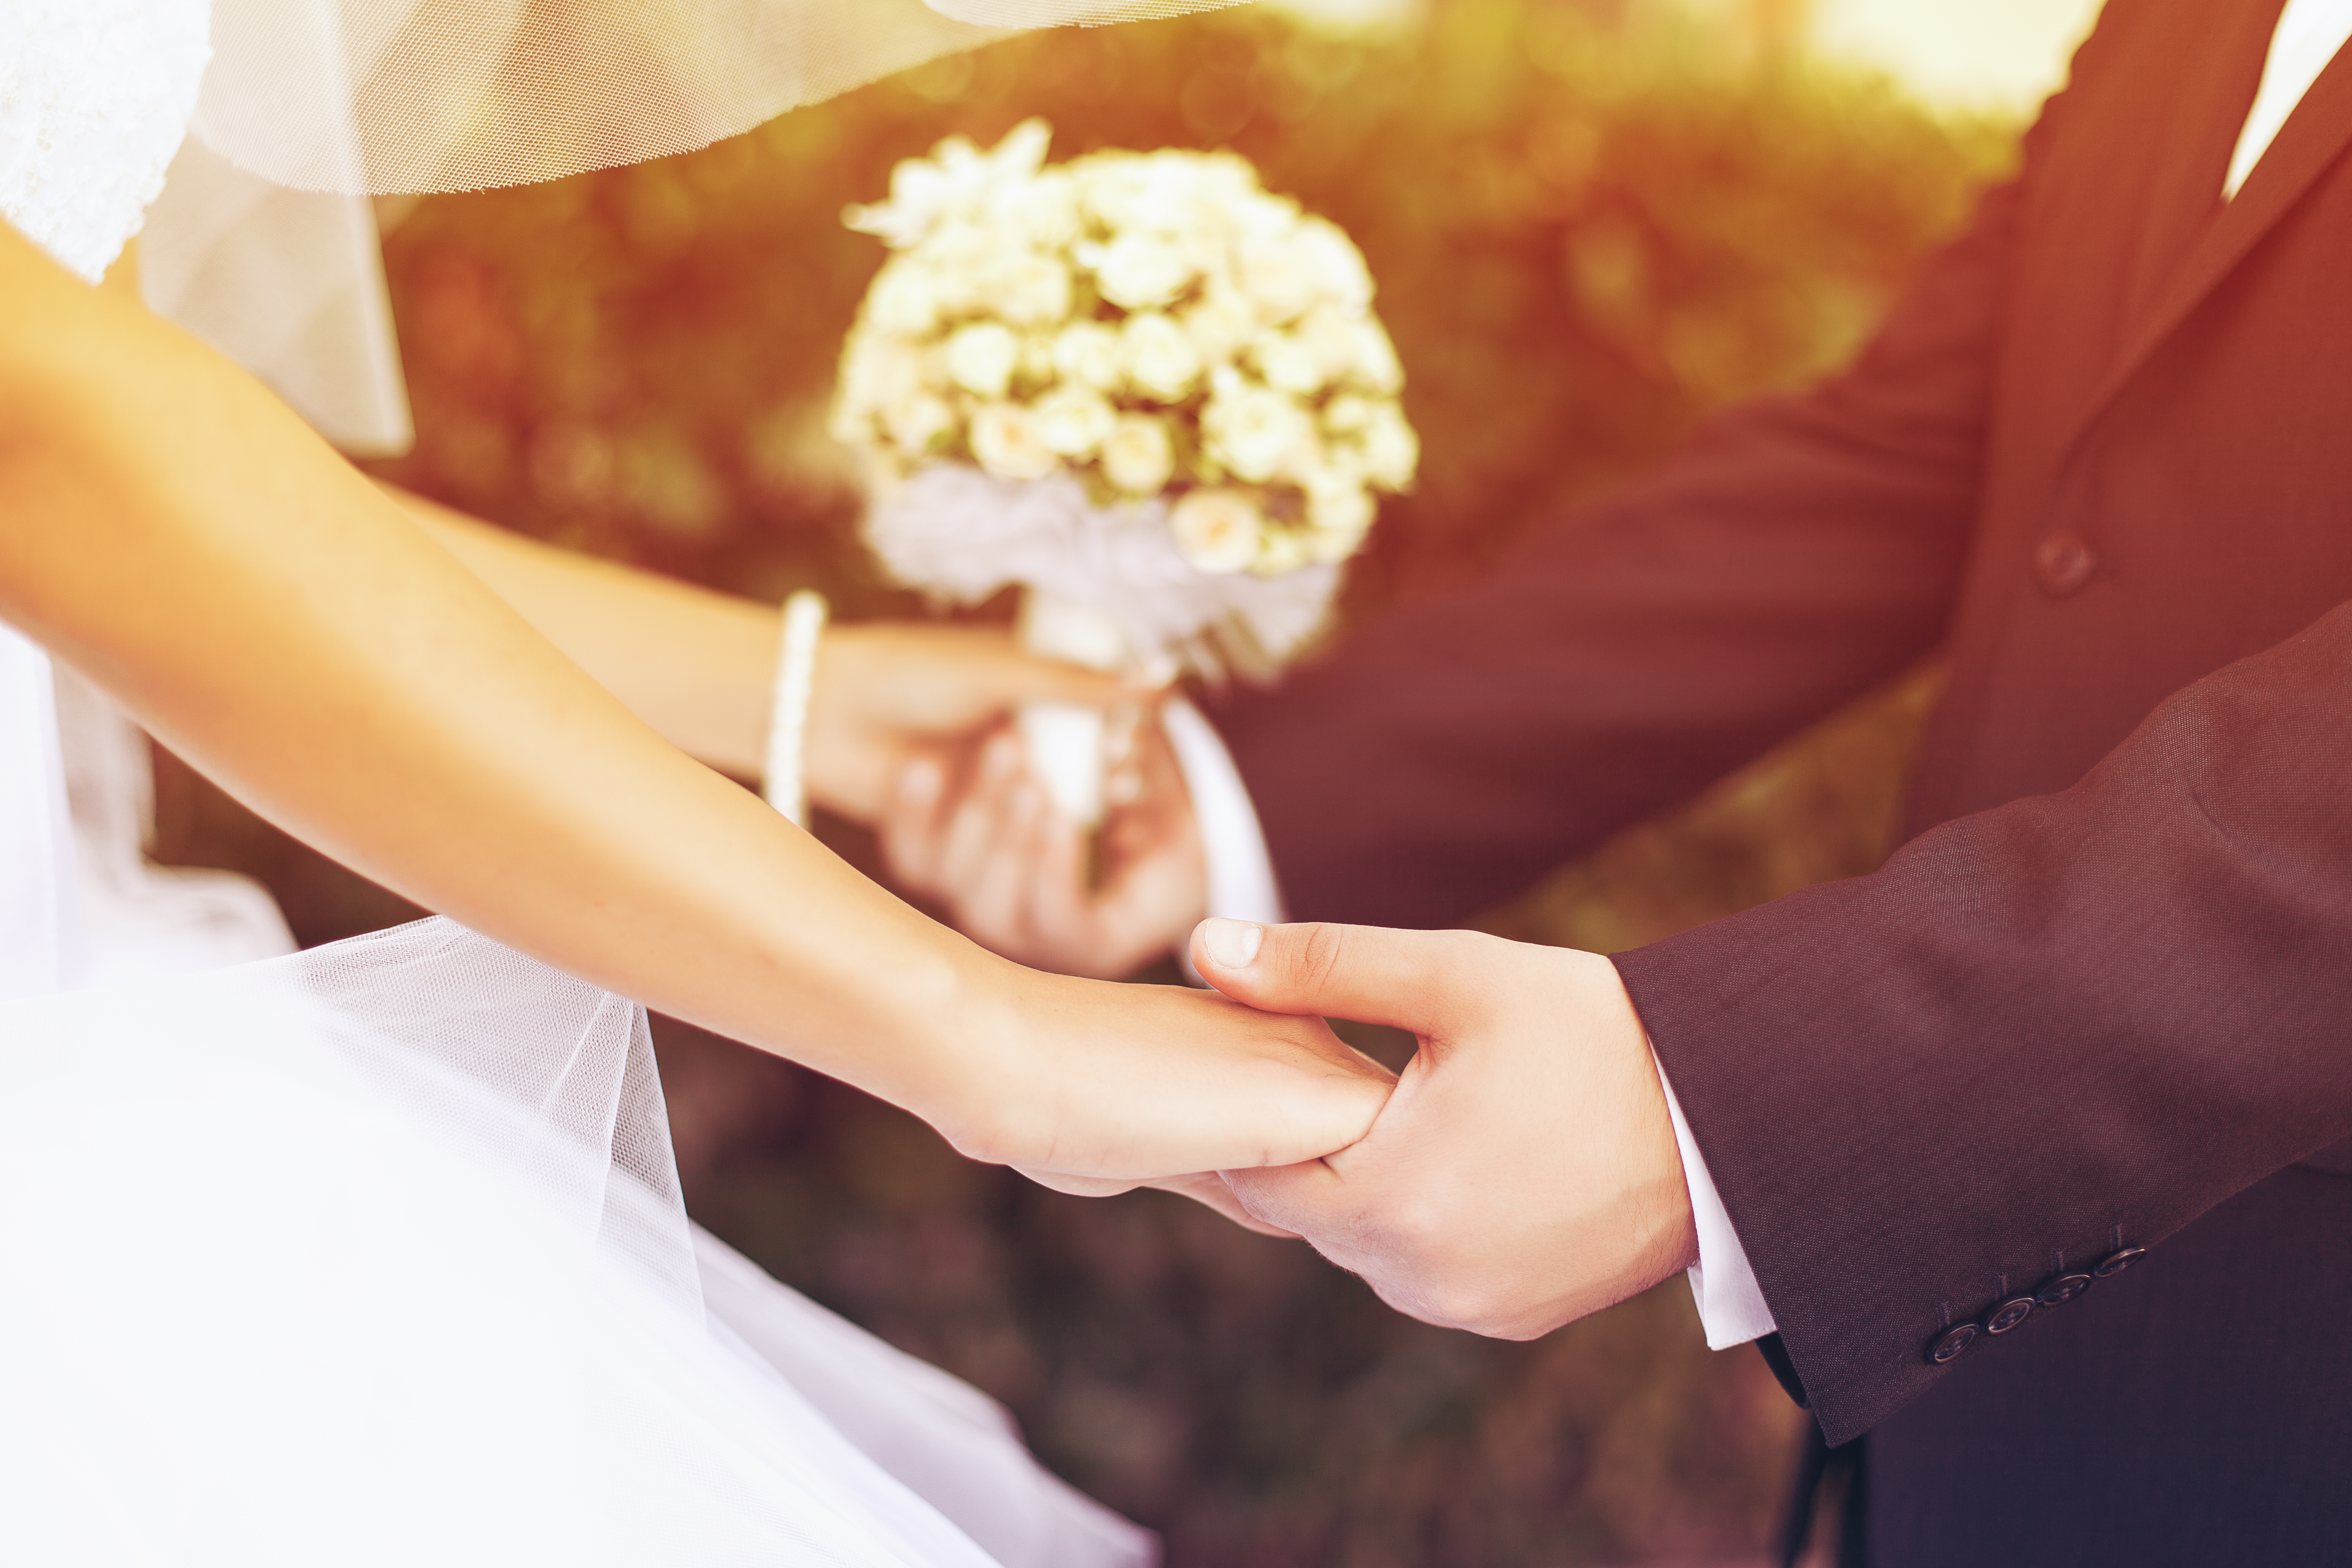 A bride and groom holding hands | Source: Shutterstock